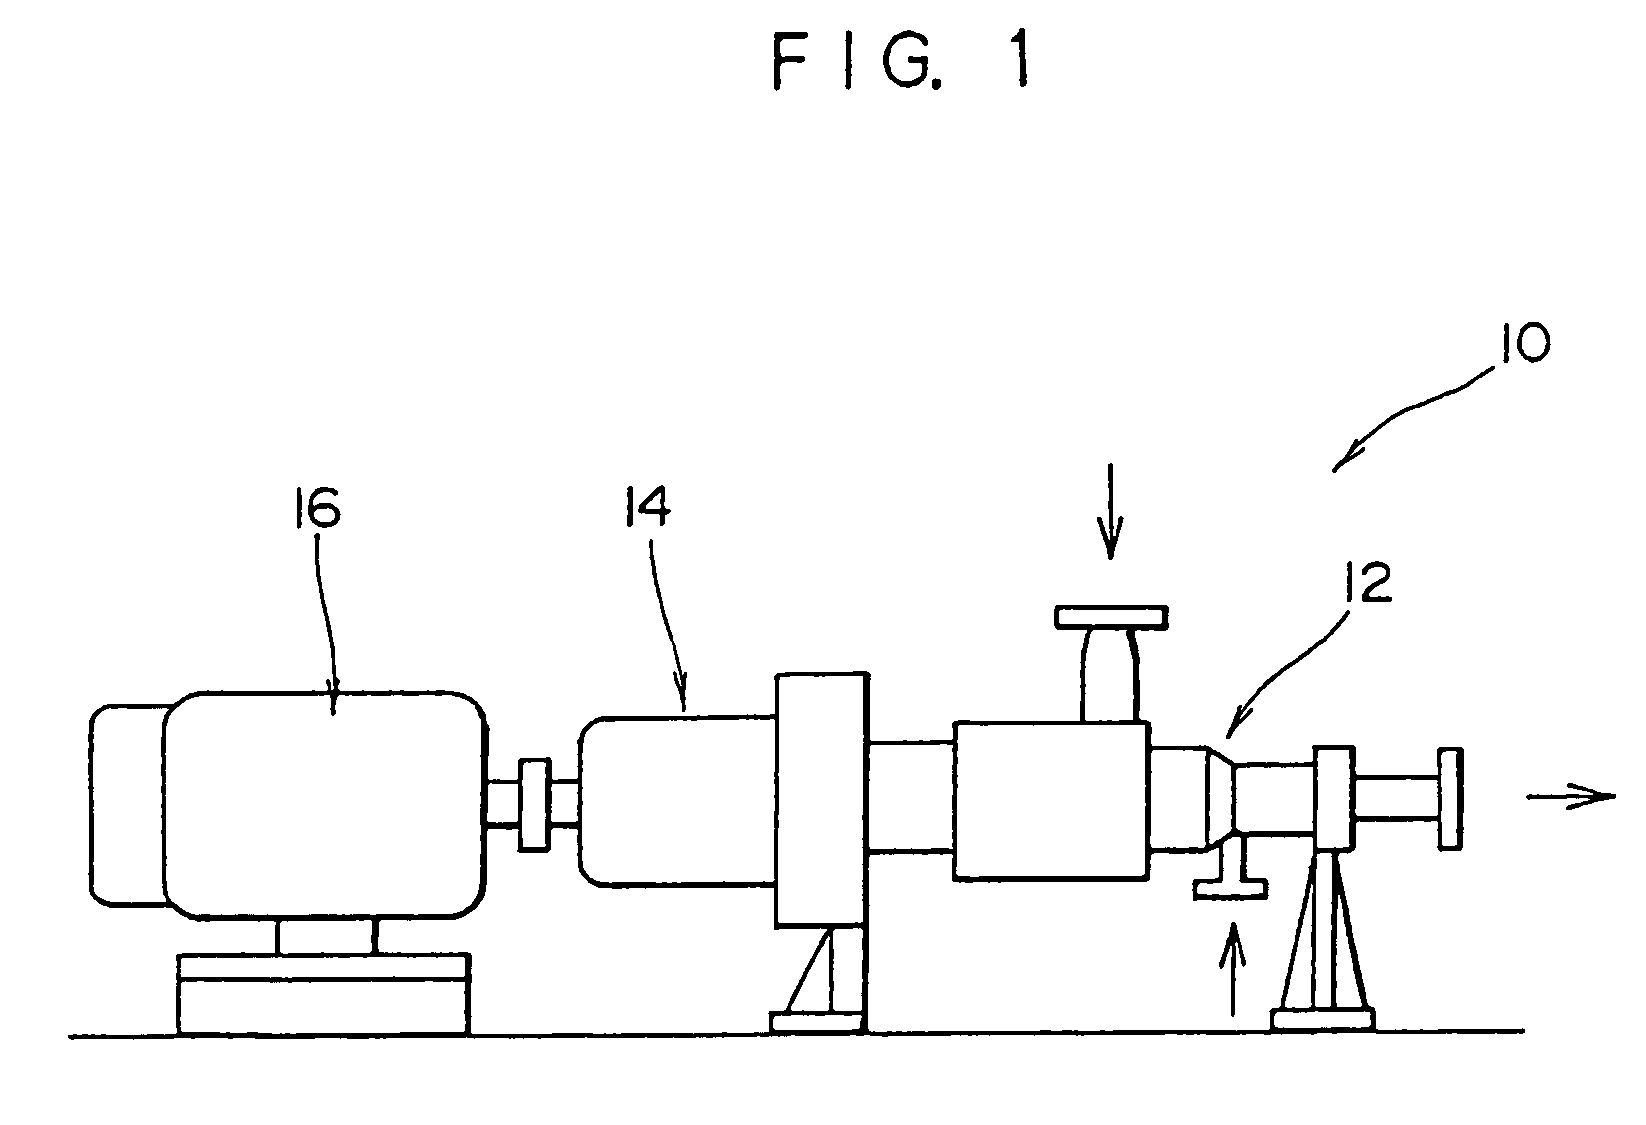 In-line mixing apparatus, process for mixing reactive chemical solutions, and process for producing microcapsules